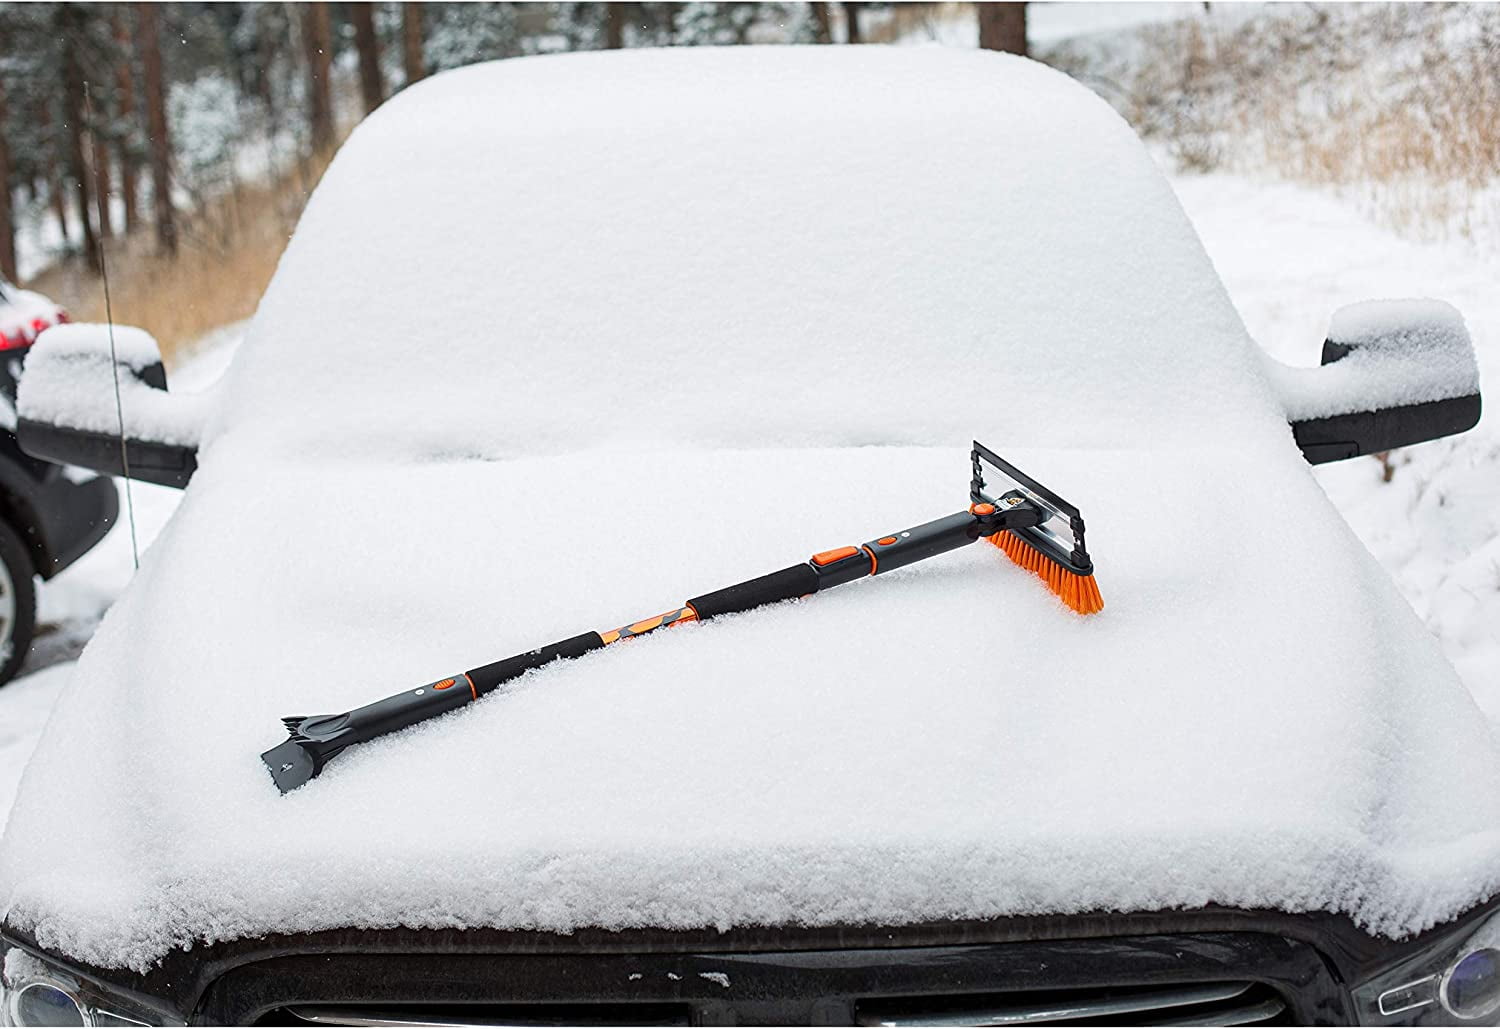  Snow MOOver 46 Extendable Snow Brush with Detachable Ice  Scraper for Car, Extra Wide 18 Squeegee & Bristle Head Broom, Size:  Truck, Car, & SUV